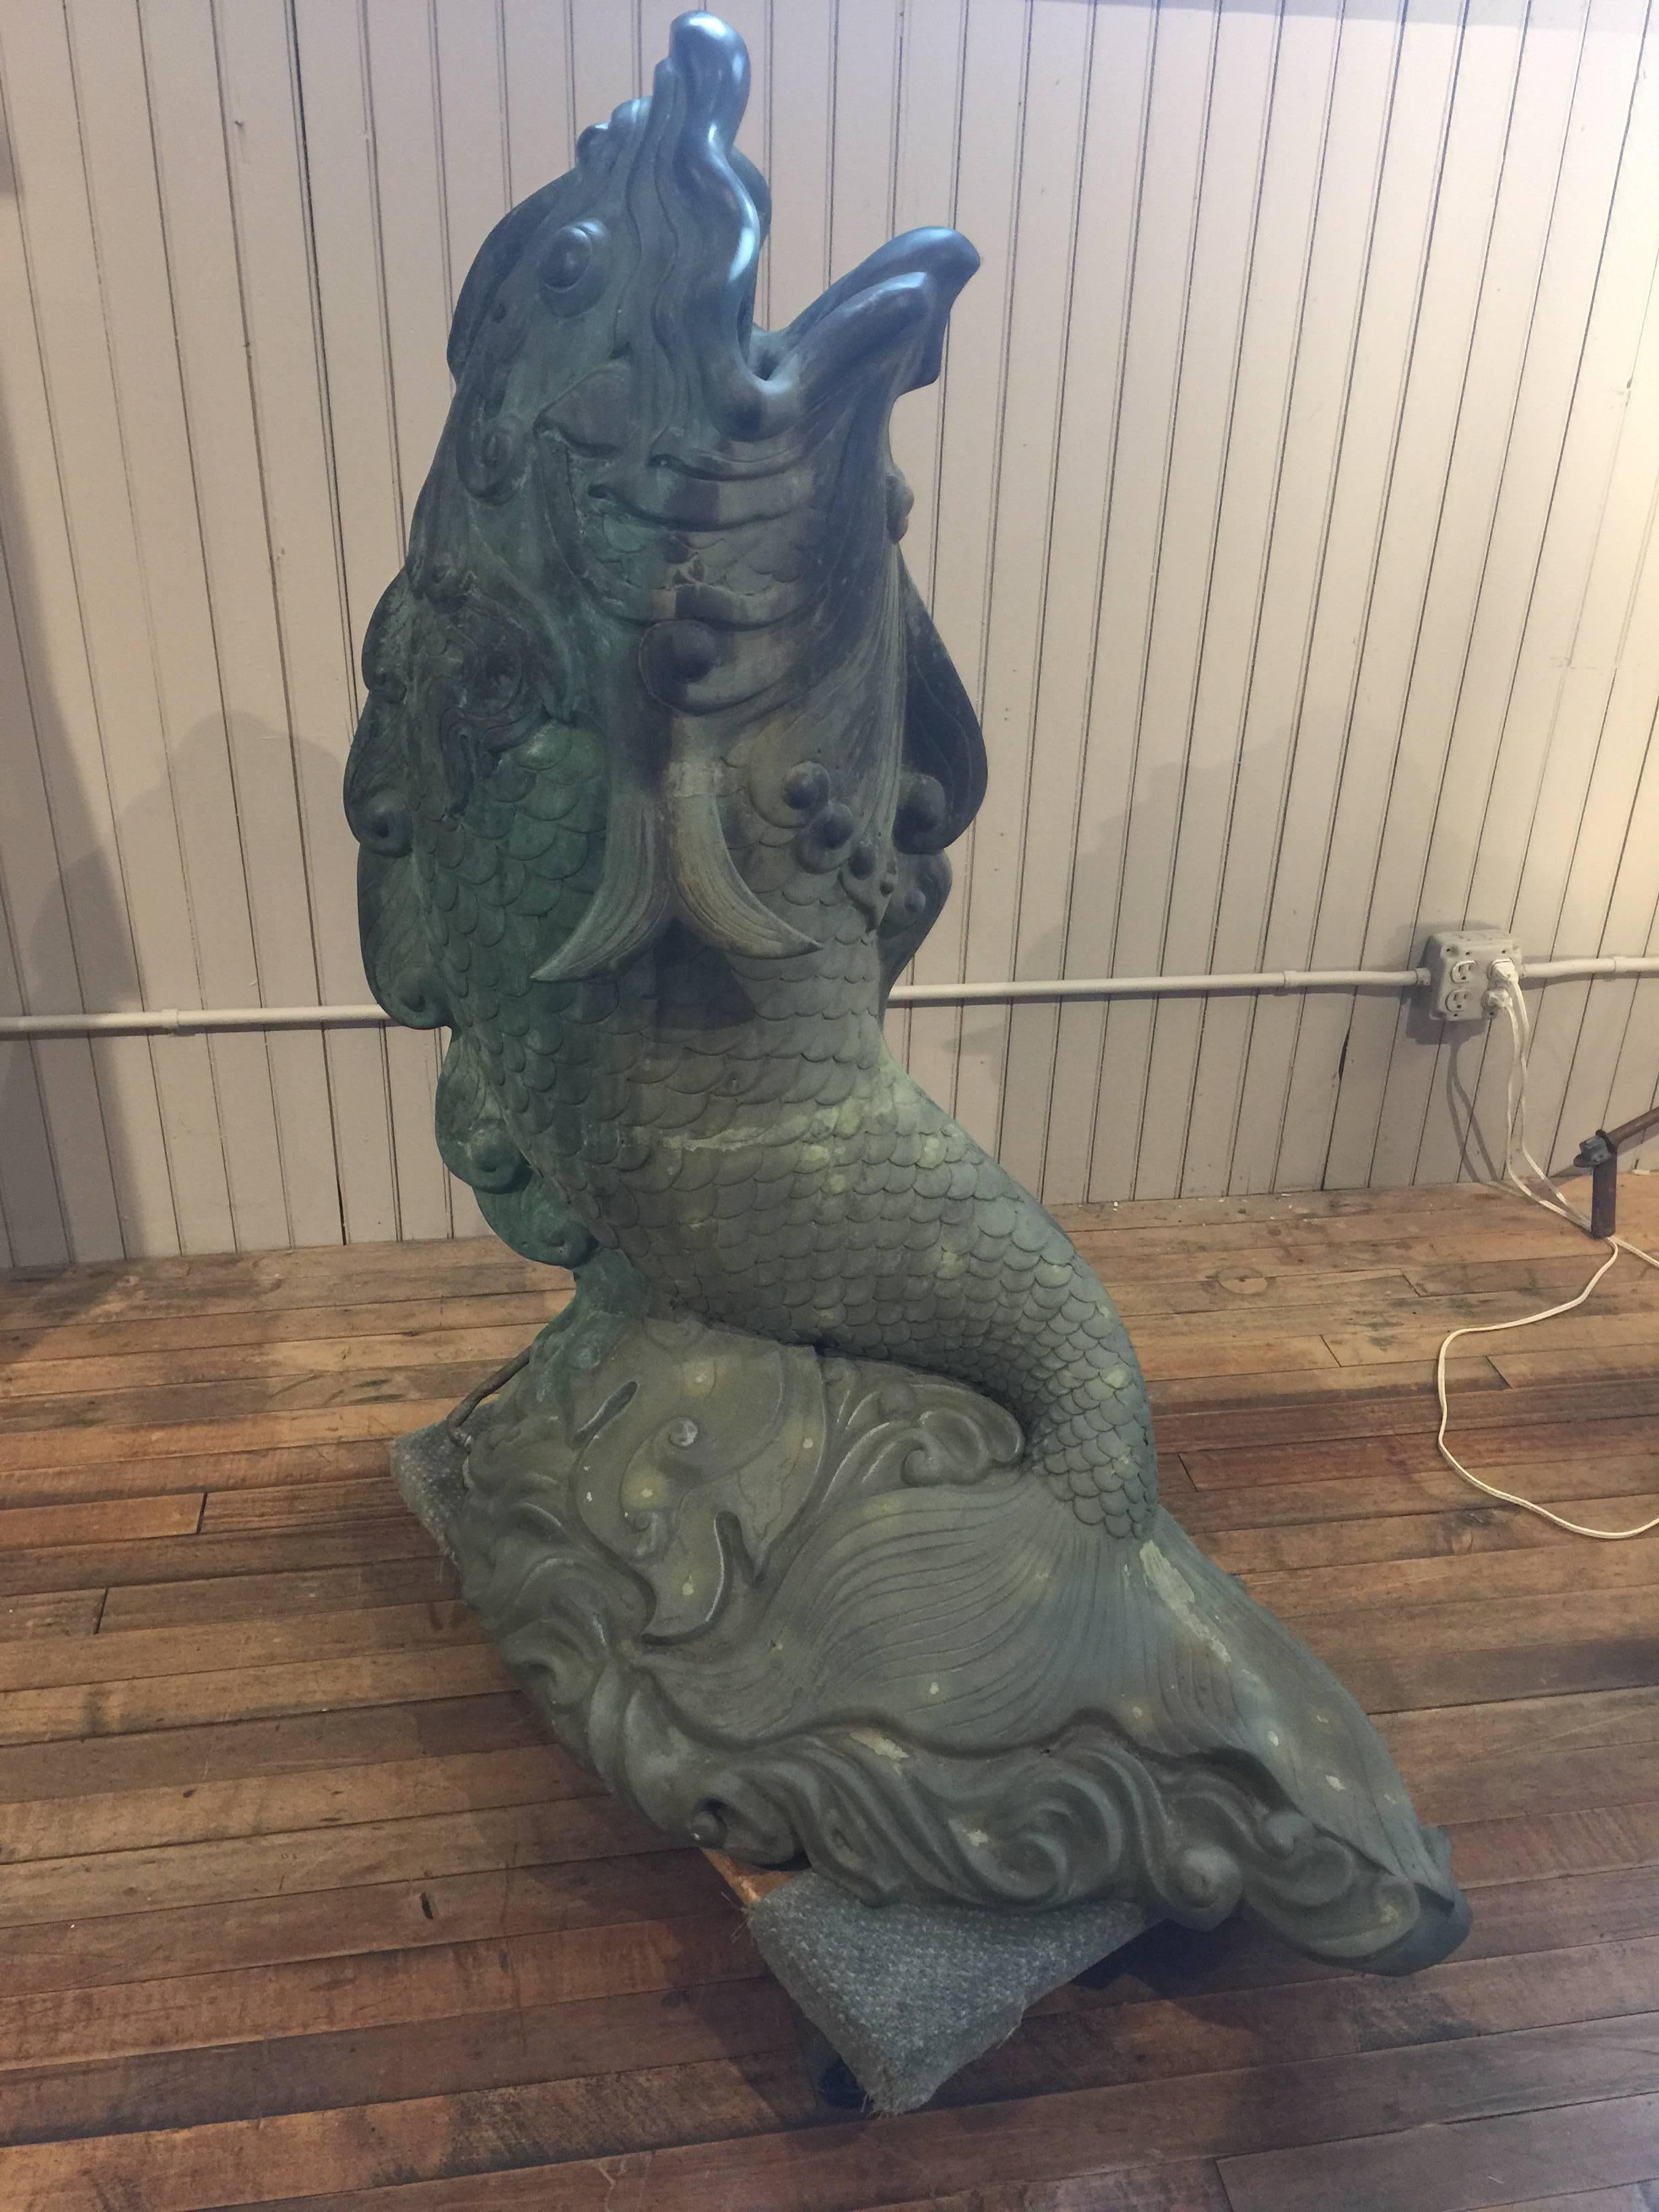 Large fish or dolphin fountain. Beautiful verdigris patina. The water comes from the mouth of the fish. Very strong and elegant piece, that would look great in any garden setting.